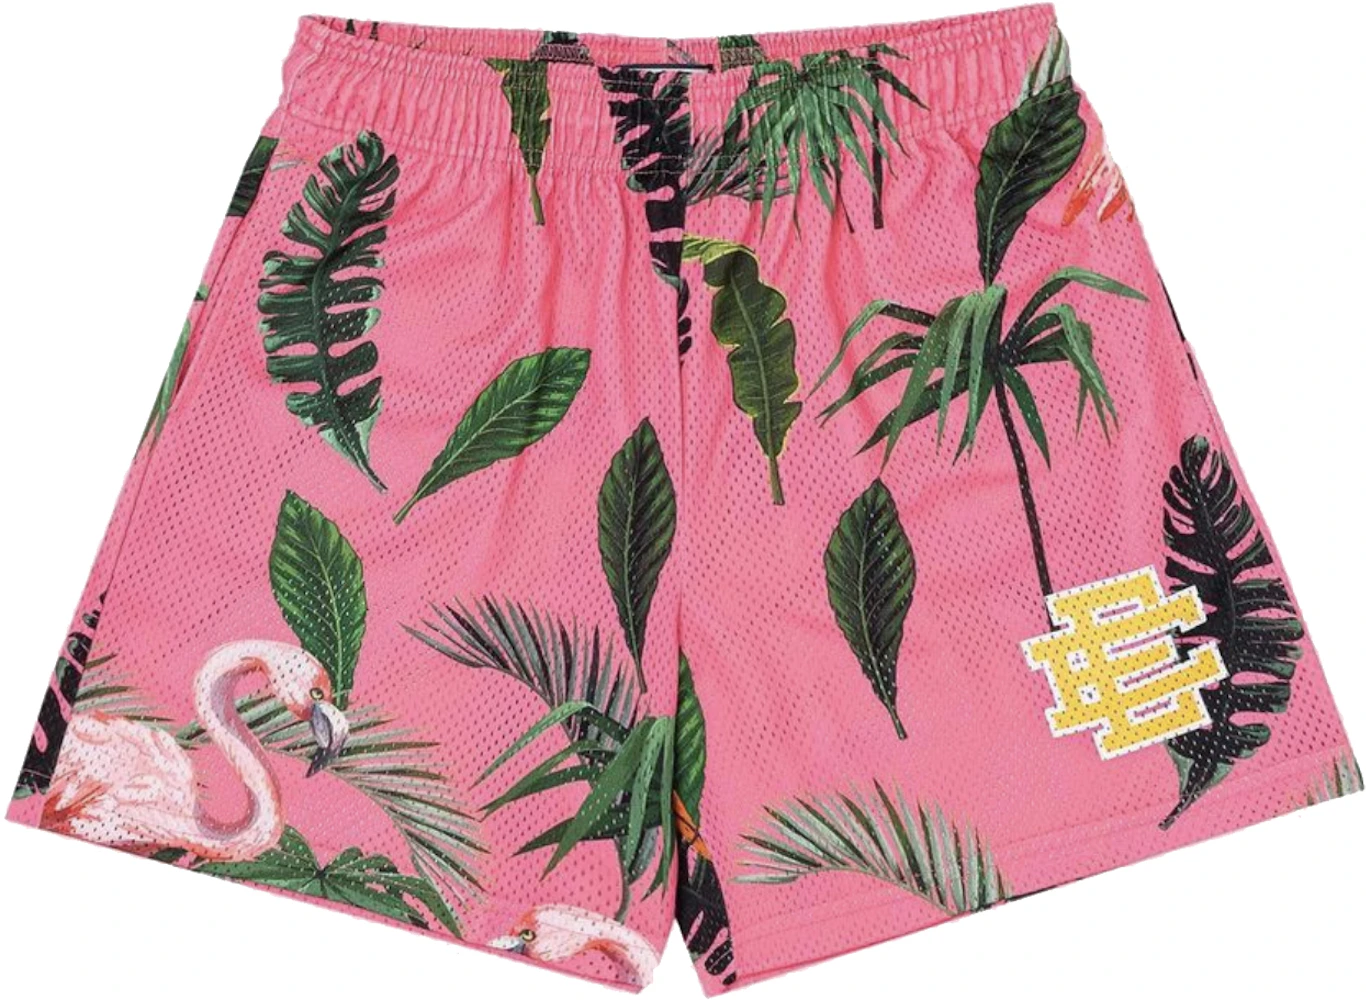 Brand New Eric Emanuel EE Basic Shorts (Pink) Size XL, Sept 10 Release